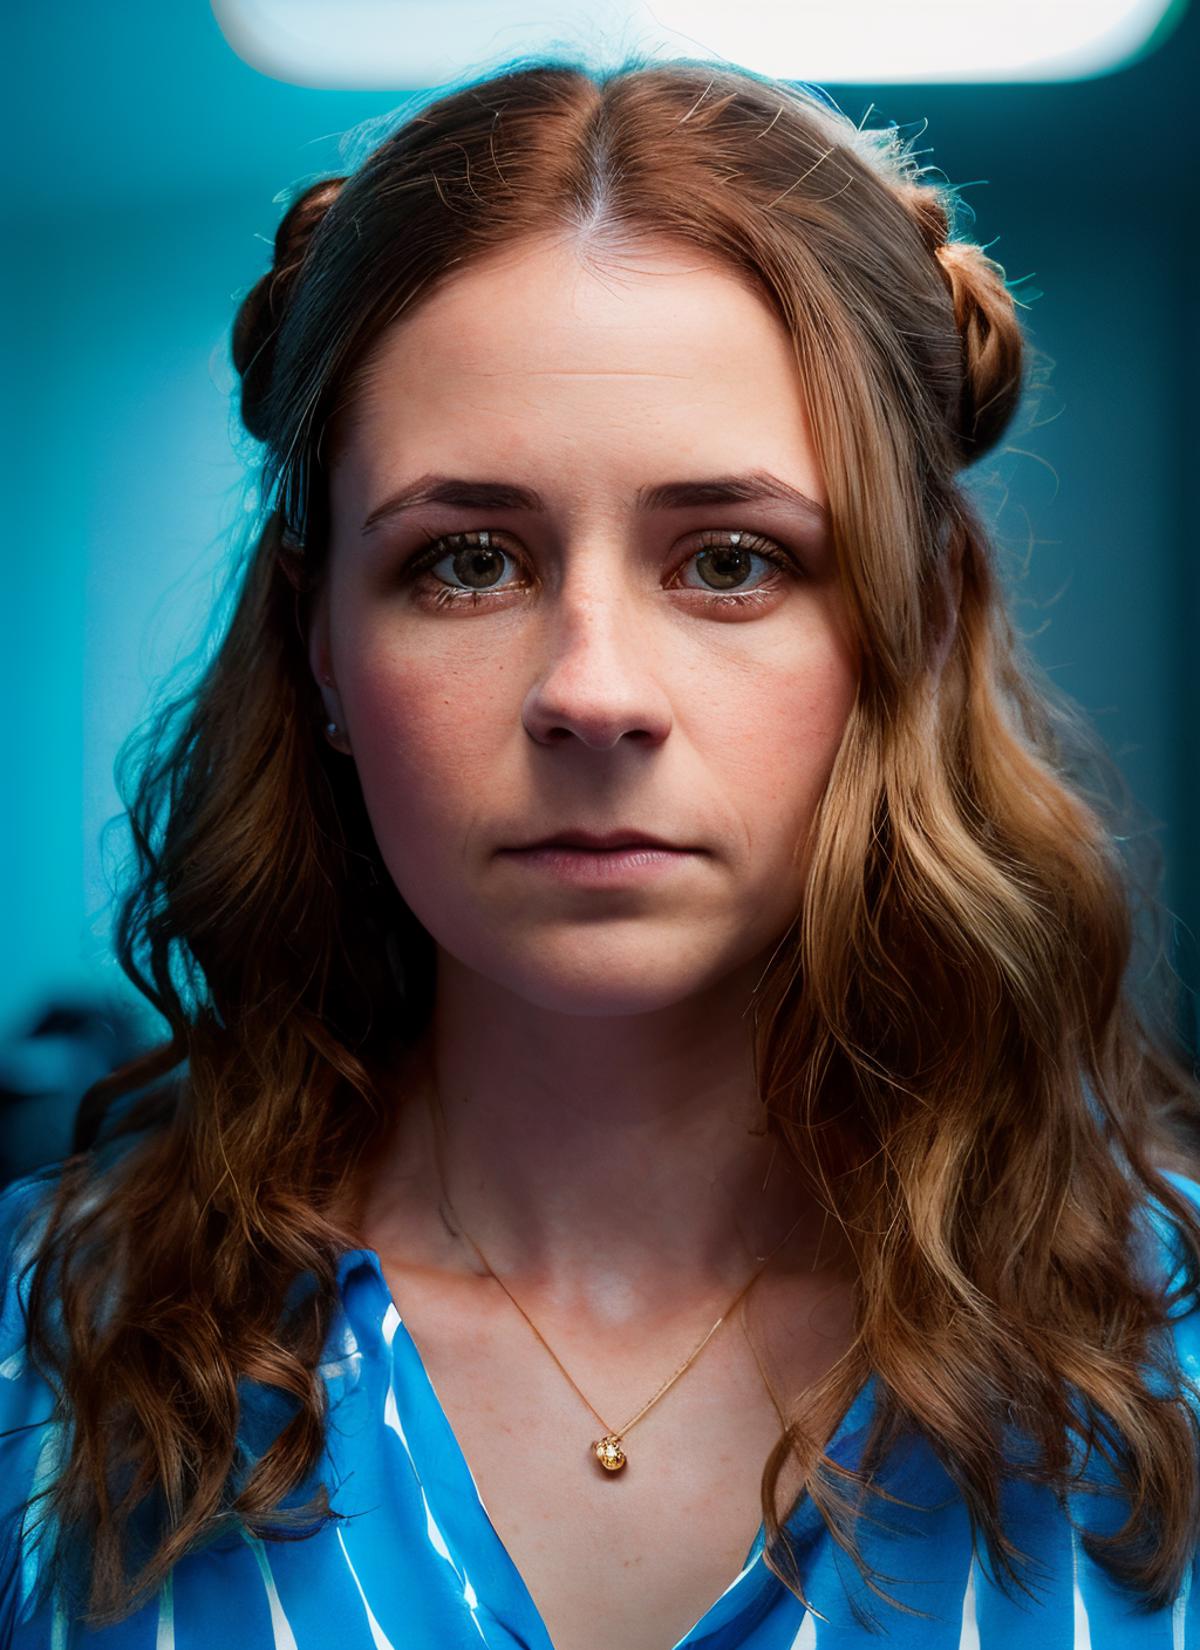 Jenna Fischer (Pam Beesly from The Office TV show) image by astragartist